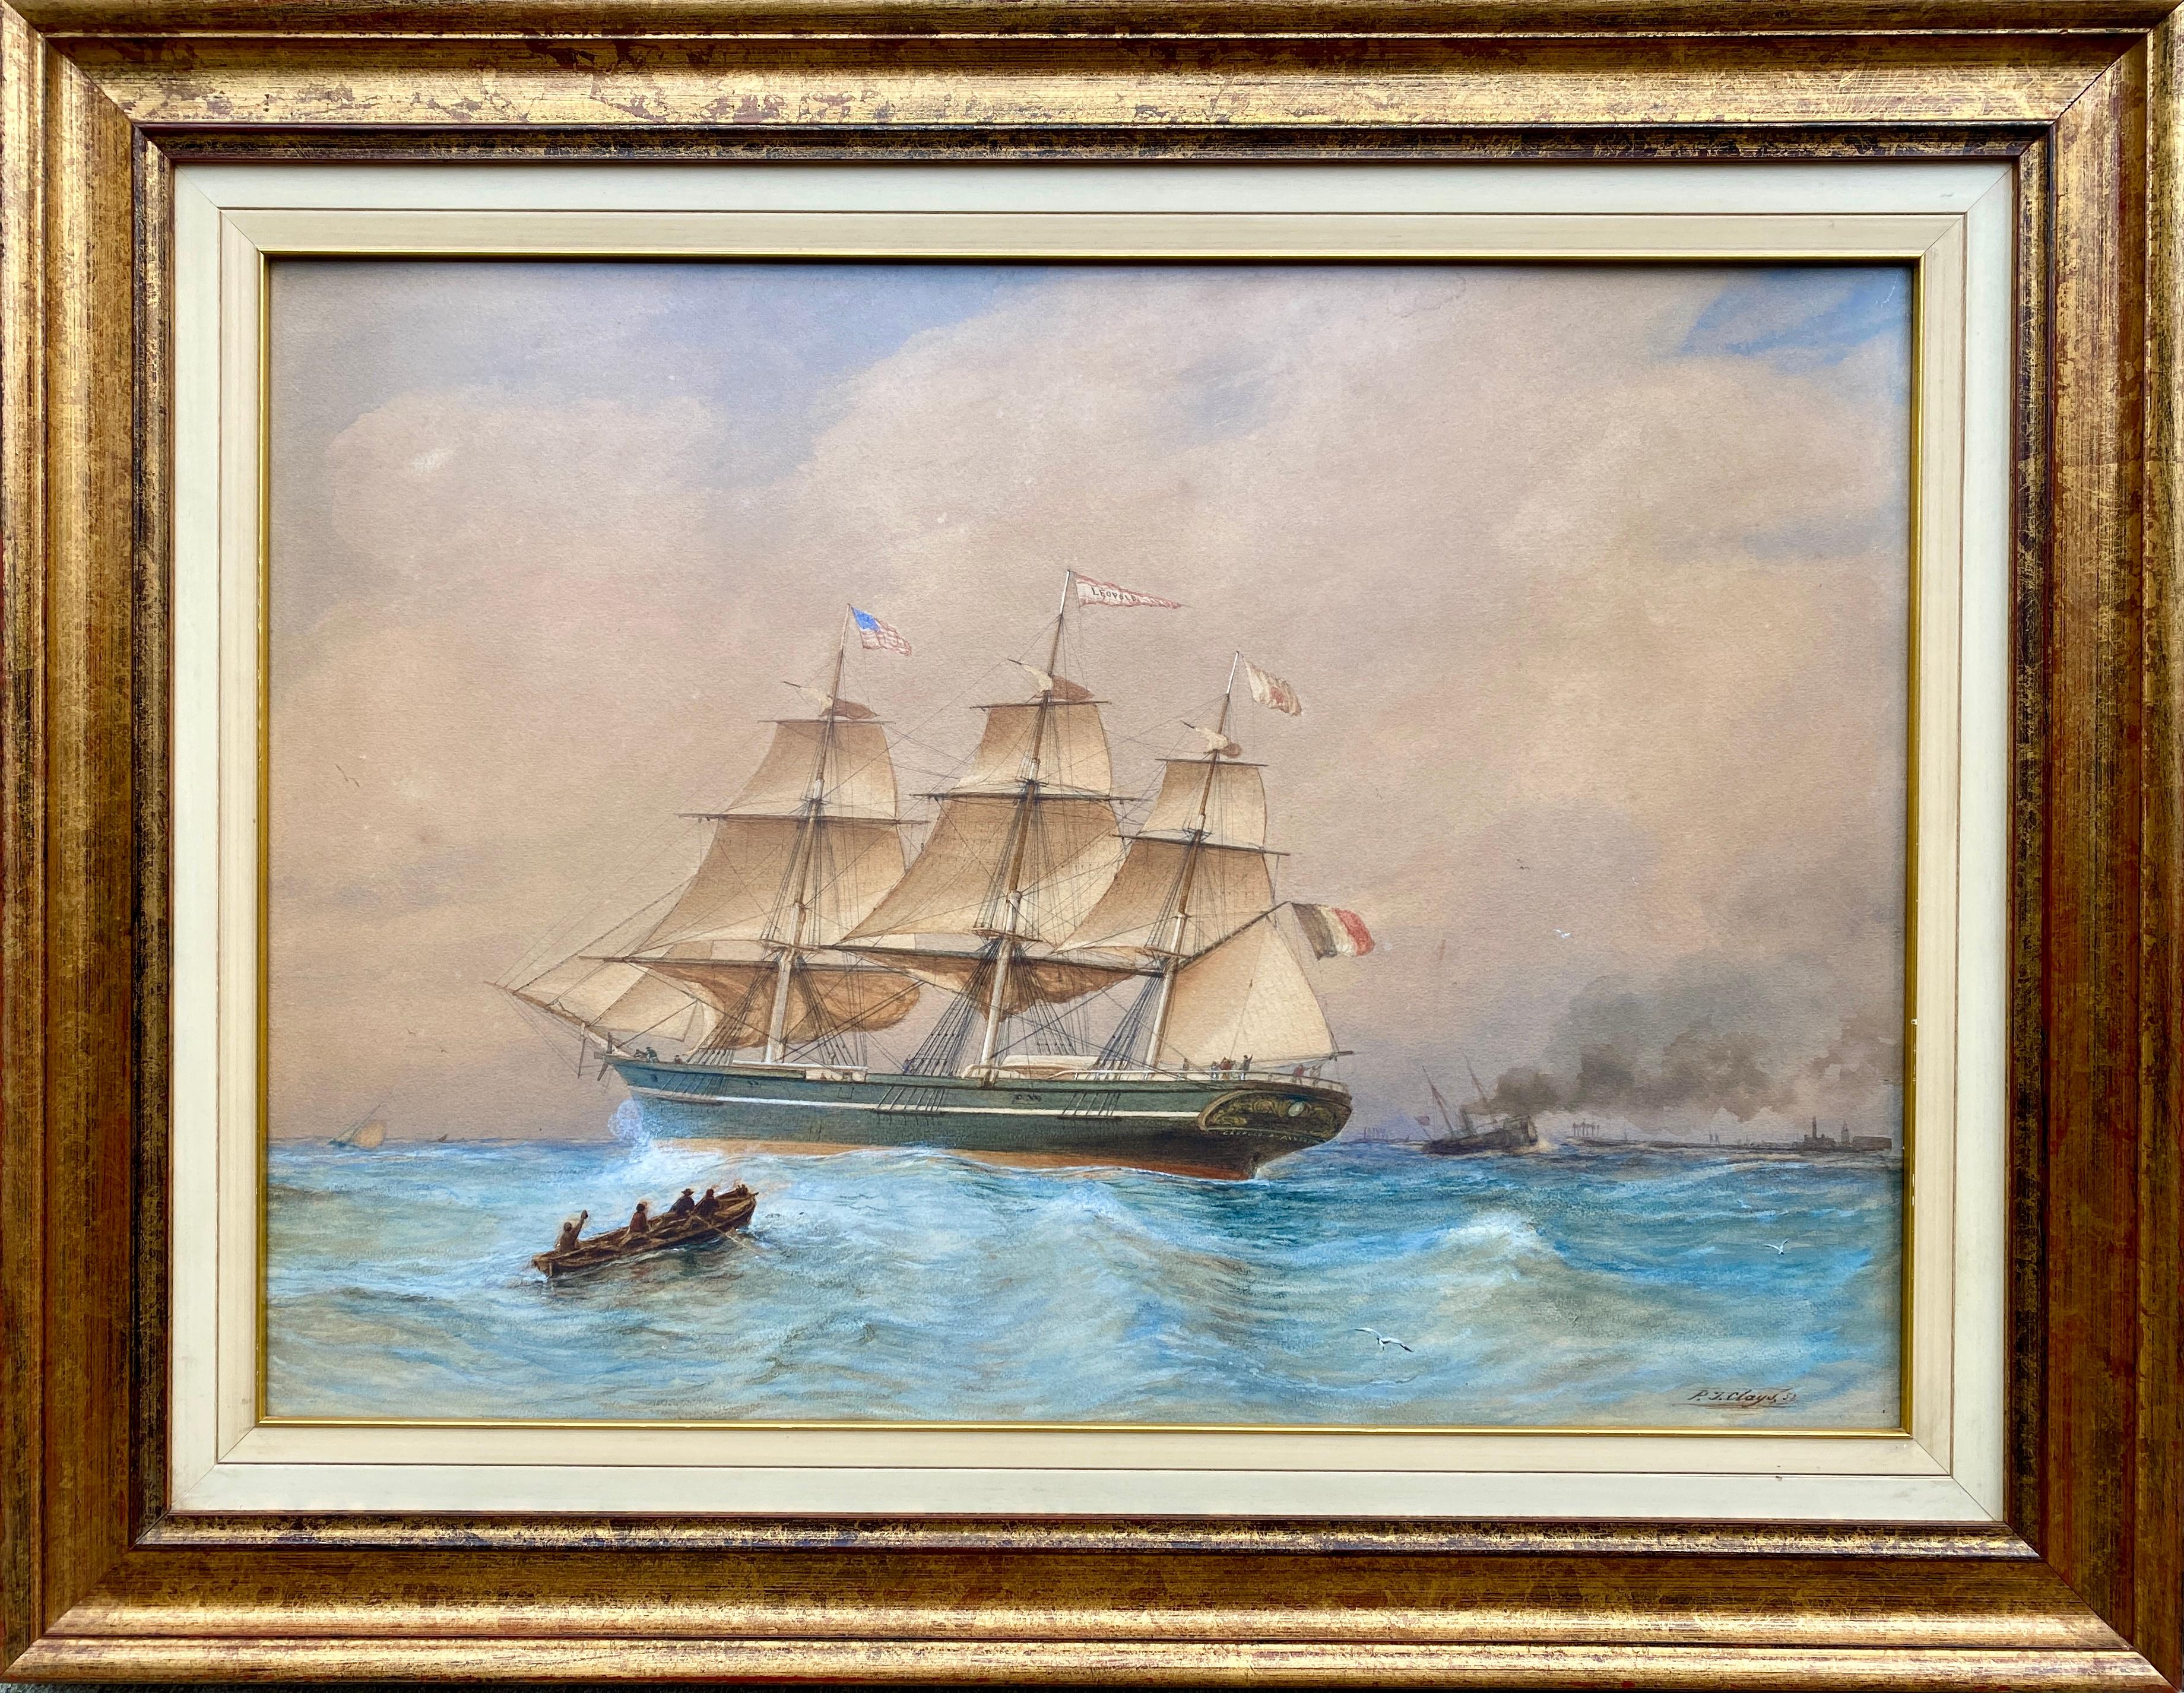 Paul Jean Clays
Bruges 1819 – 1900 Brussels
Belgian Painter

‘Full Speed Ahead’

Signature: Signed bottom right and dated 1858 
Medium: Aquarelle
Dimensions: Image size 49 x 68,5 cm, frame size 71 x 91 cm

Biography: Clays Paul Jean Charles was born